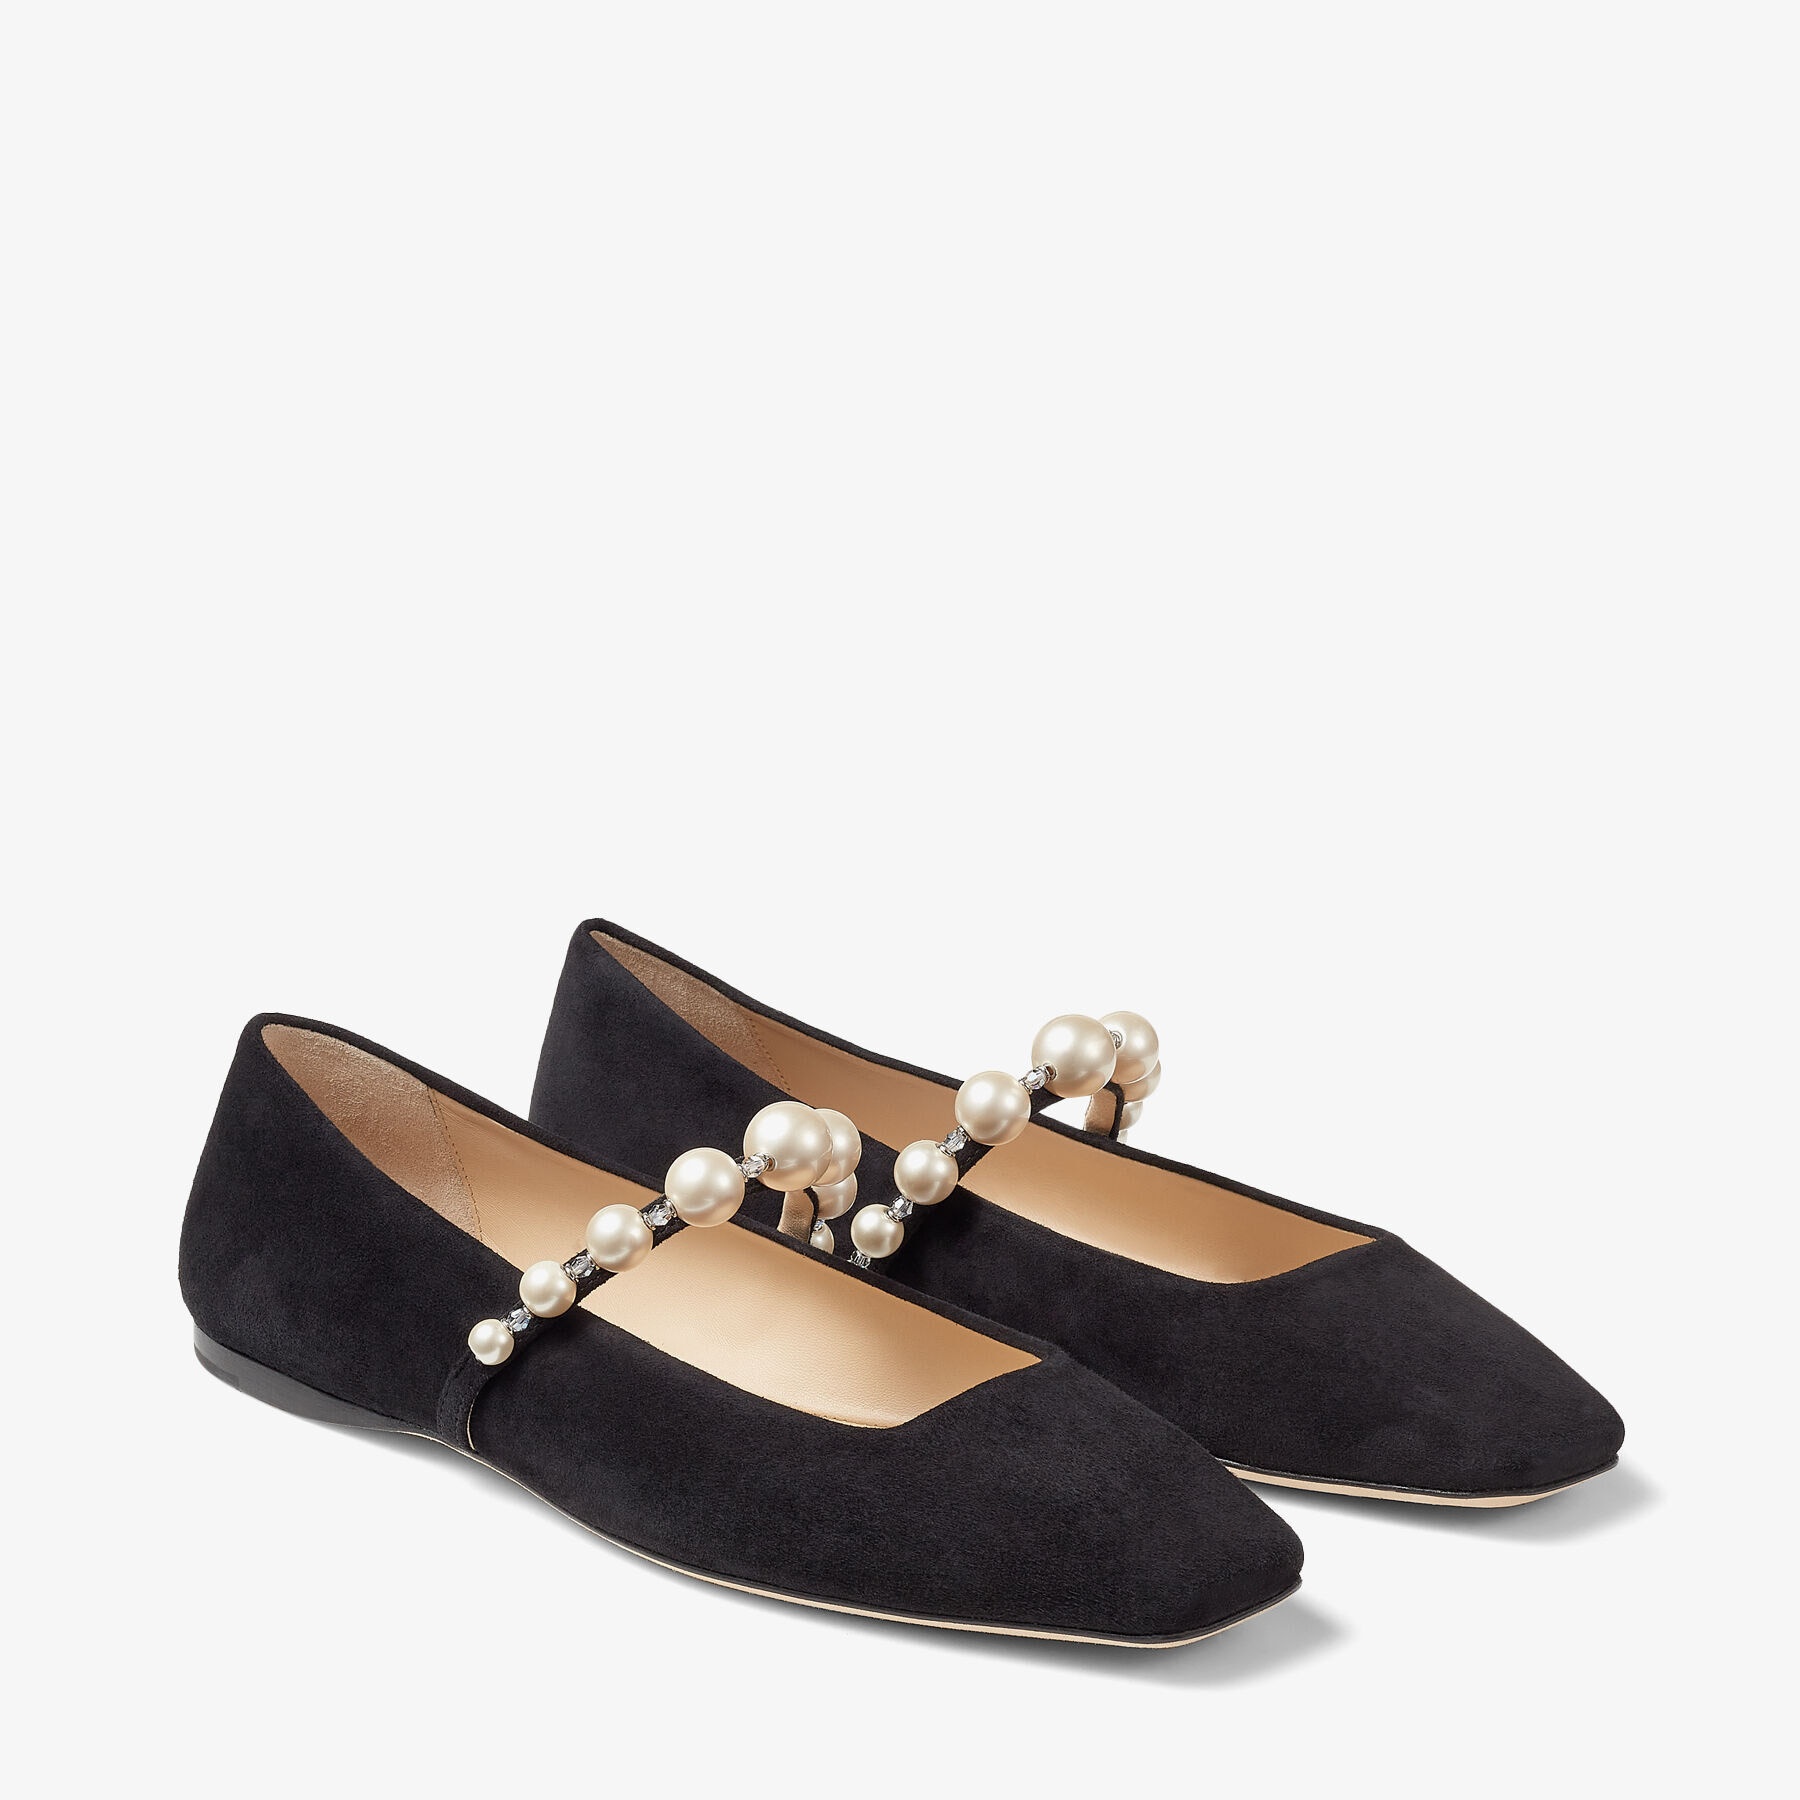 Ade Flat
Black Suede Flats with Pearl Embellishment - 3